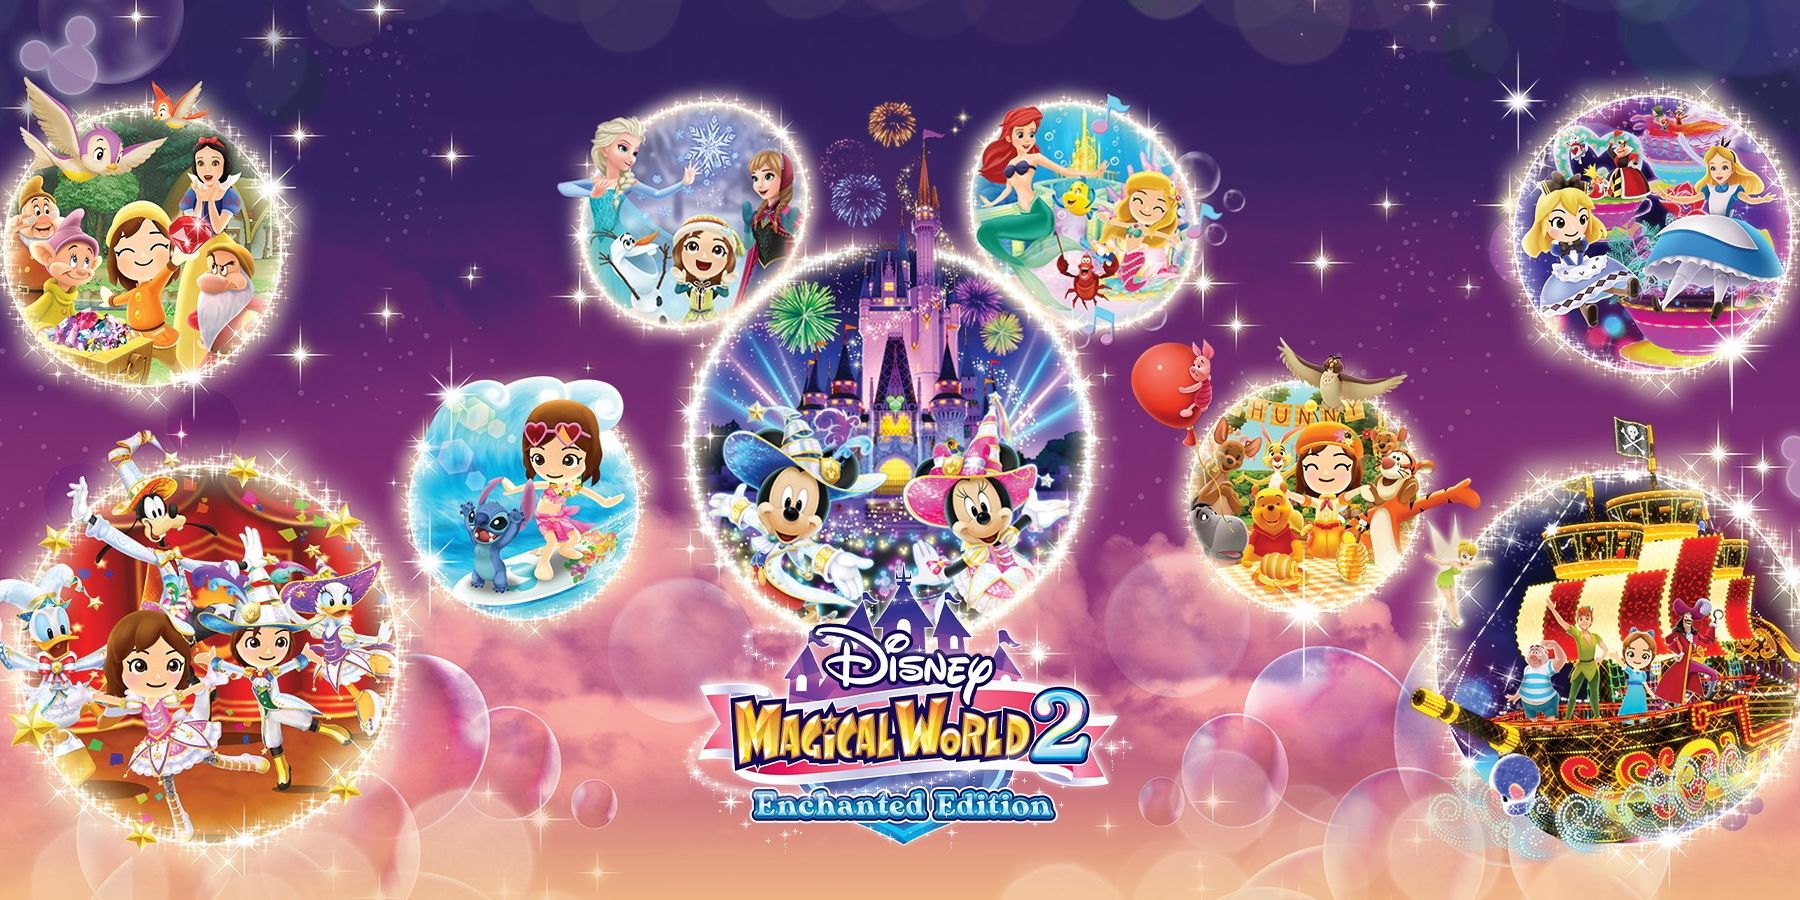 Disney Magical World 2: Enchanted Edition in arrivo quest’anno